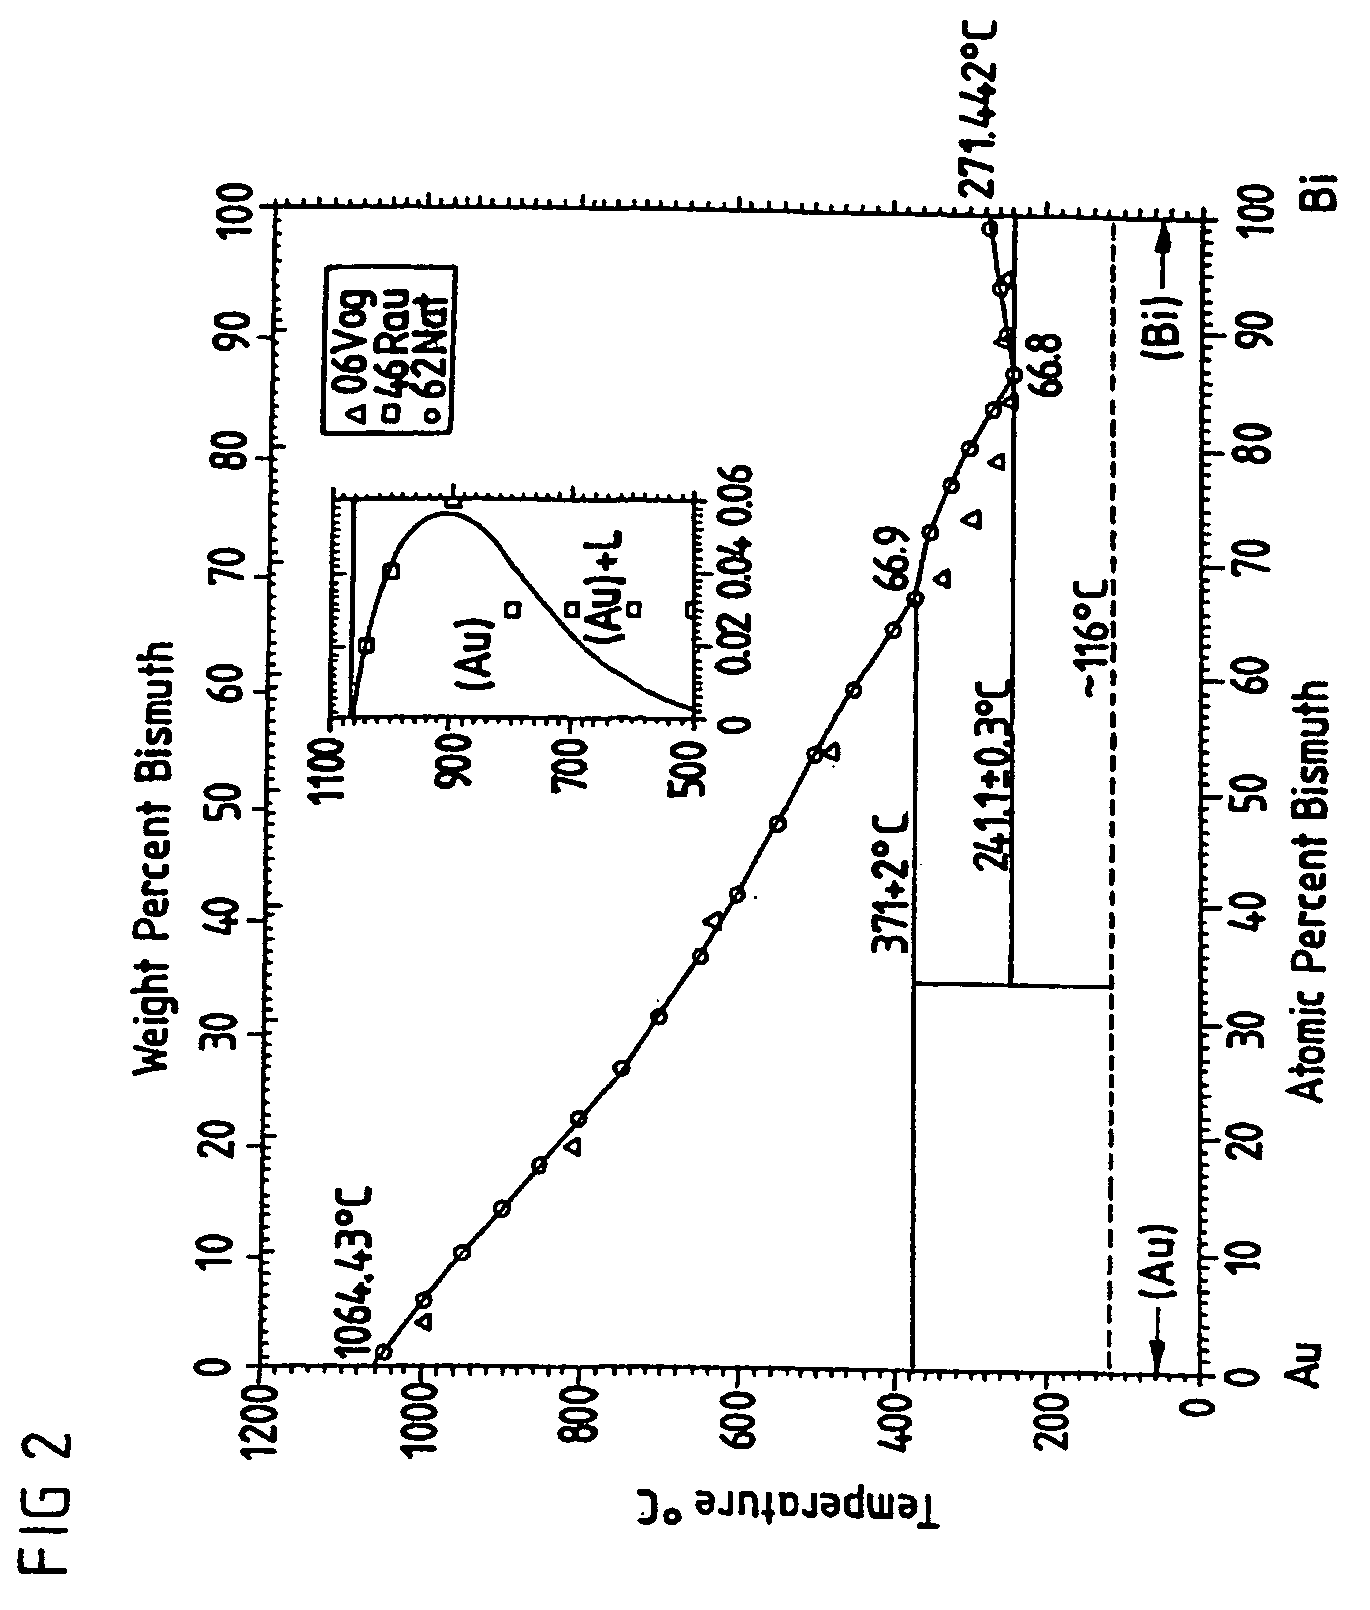 Solder, microelectromechanical component and device, and a process for producing a component or device